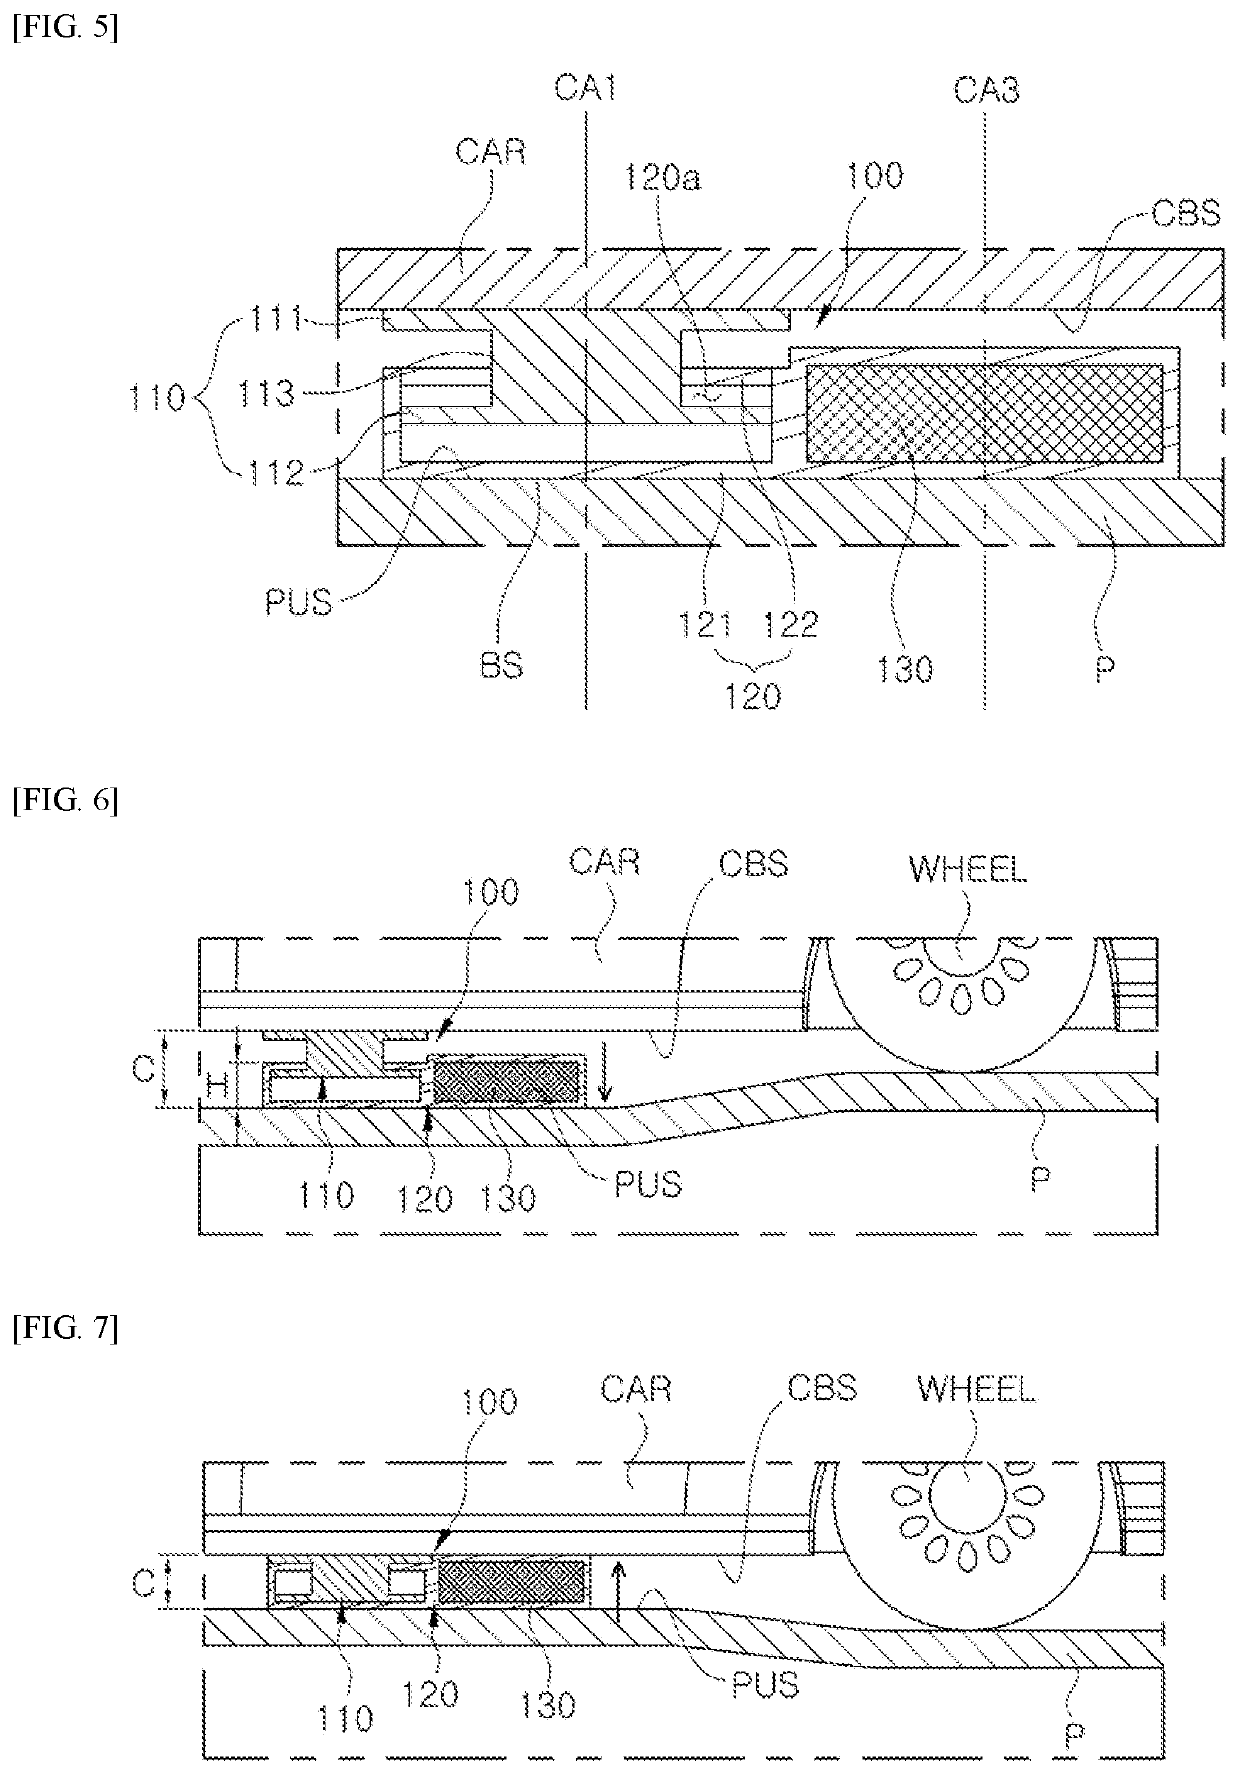 Clearance compensation device for model car